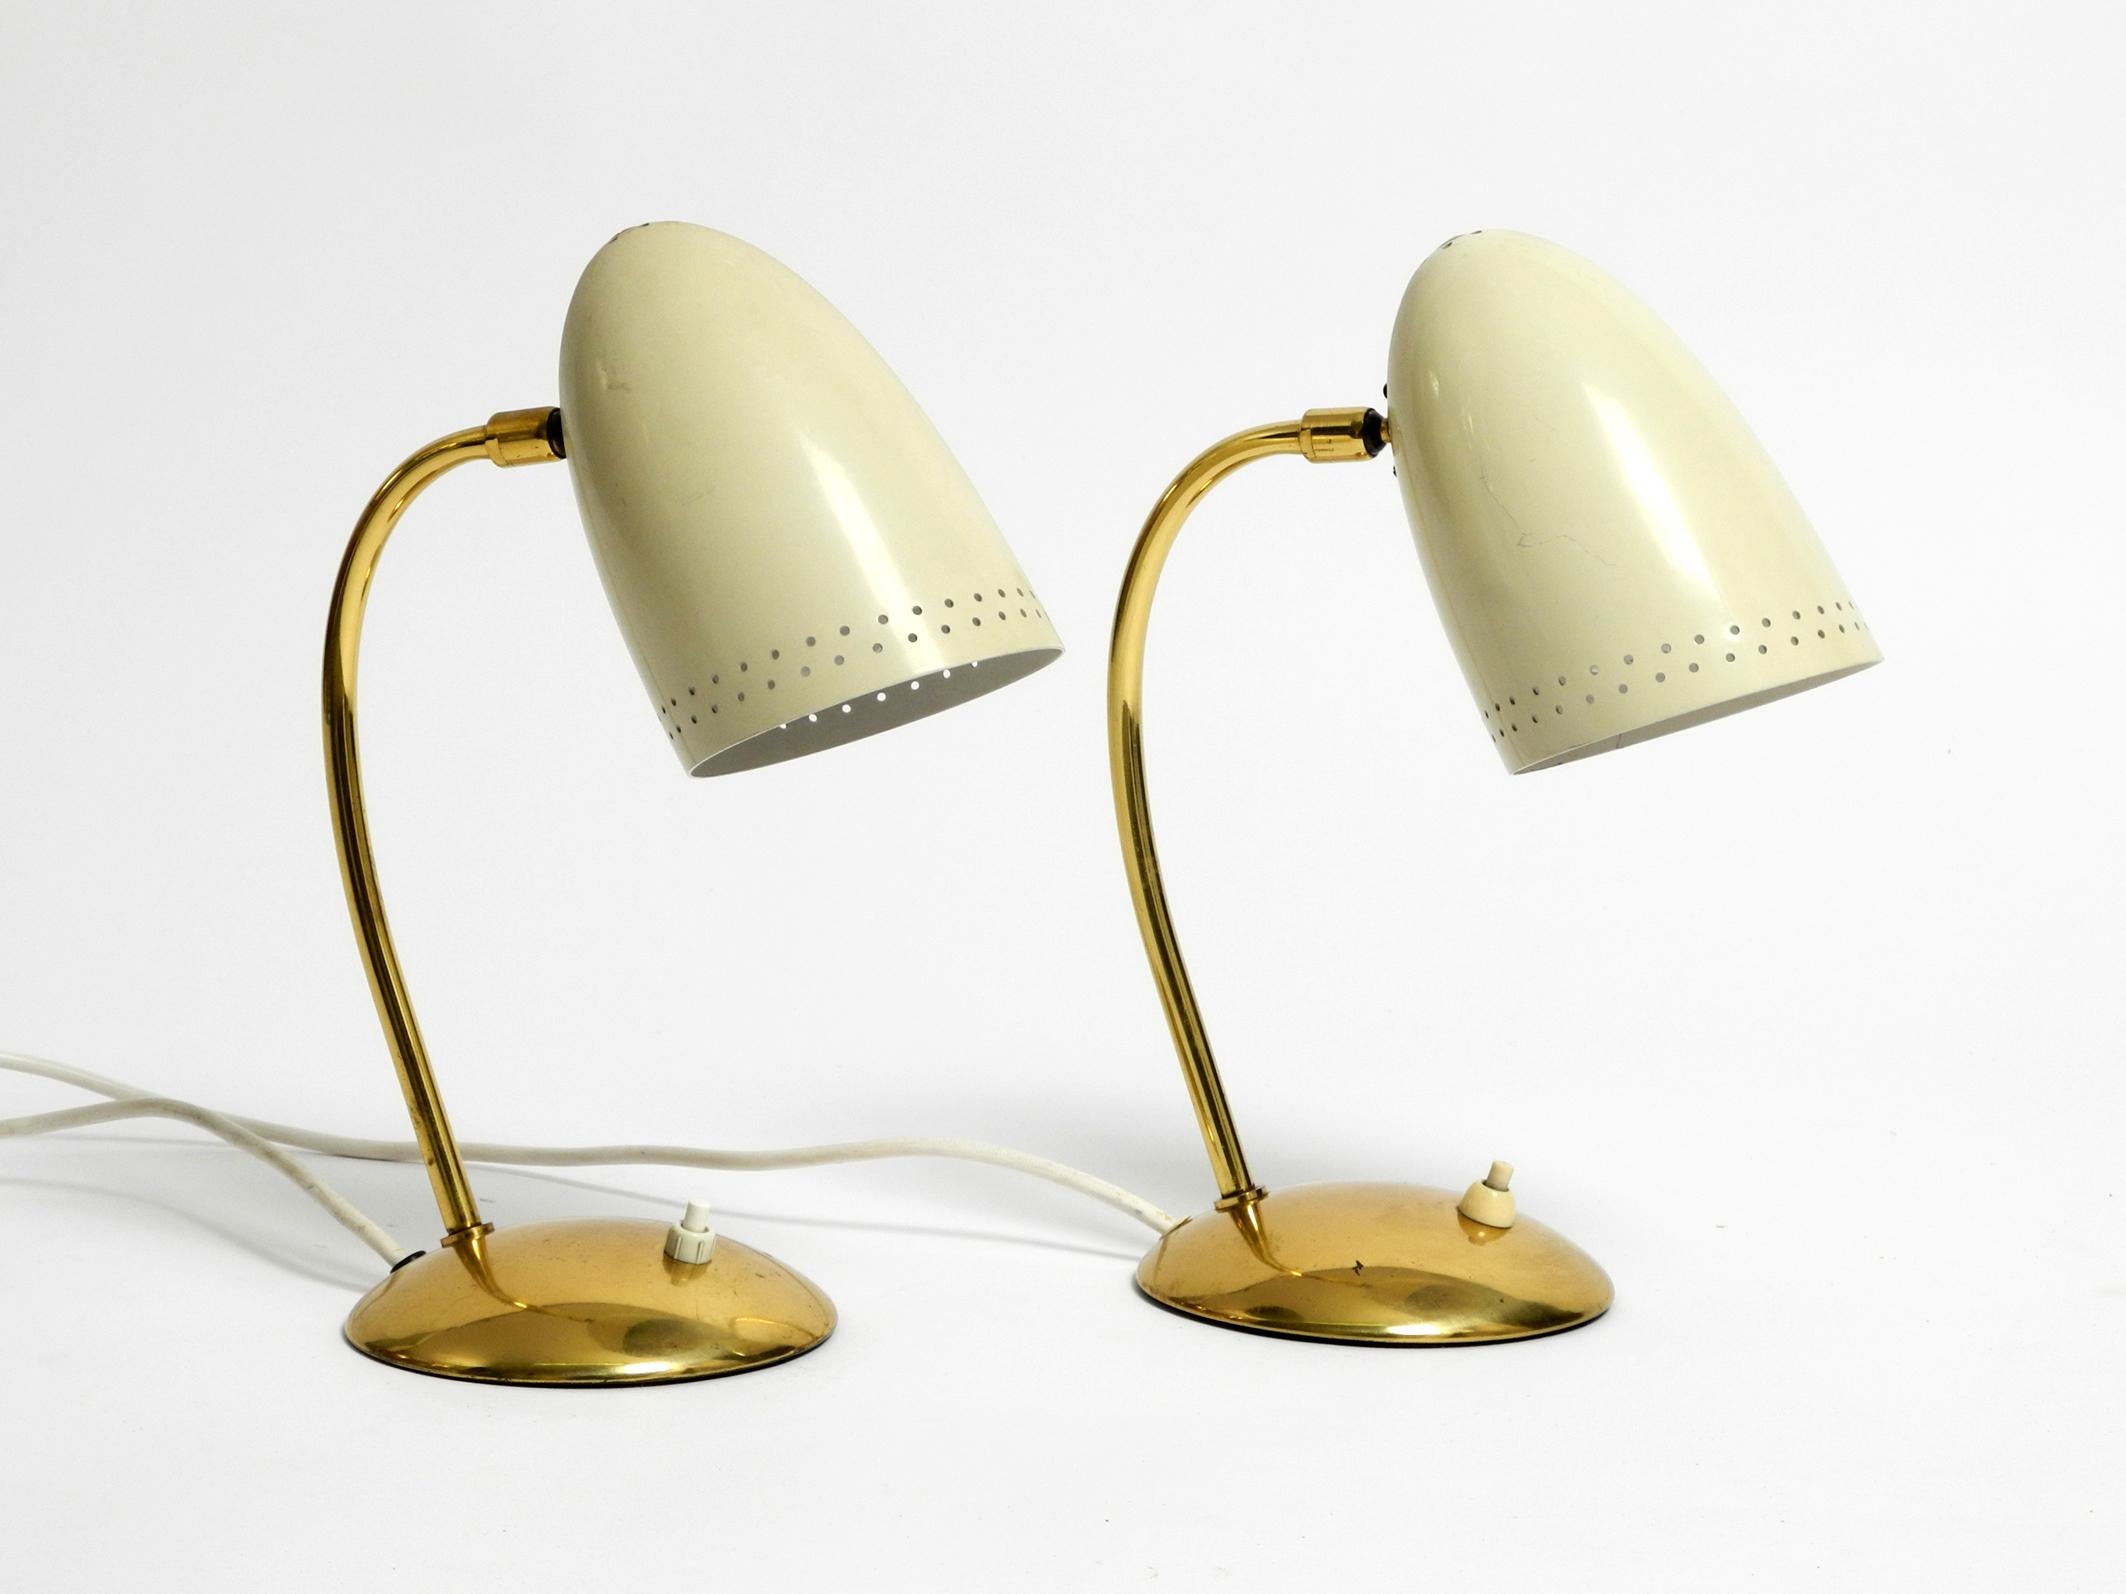 Pair of beautiful Mid-Century Modern brass table lamps with beige metal shades.
Great 1950s German Minimalist design in very good condition.
Lampshades are with small decorative holes on the rim.
Shades can be moved steplessly in all directions.